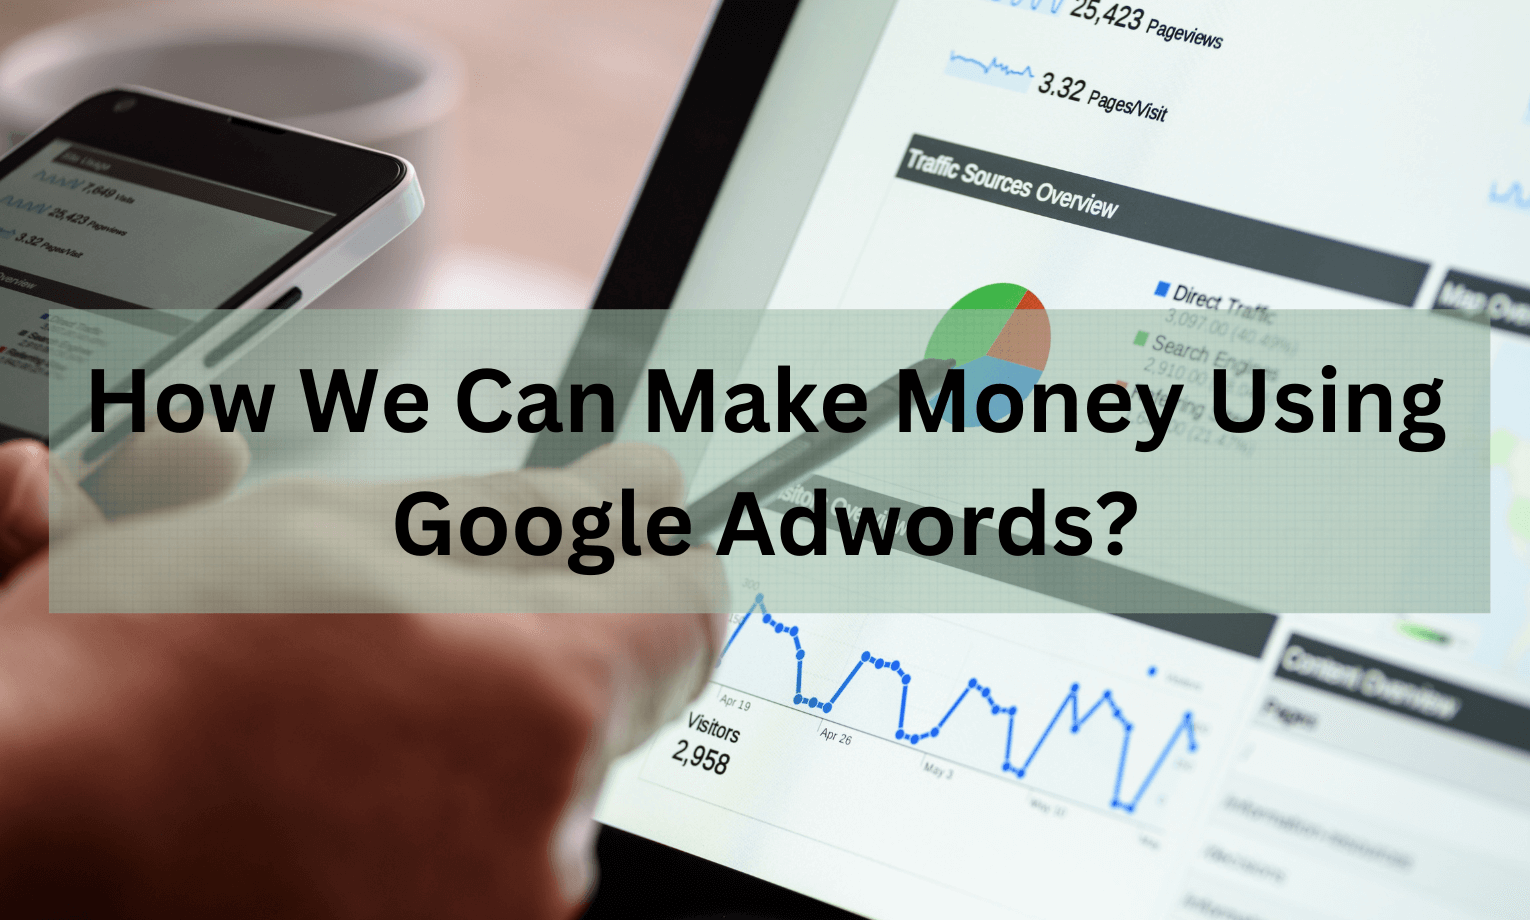 How We Can Make Money Using Google Adwords